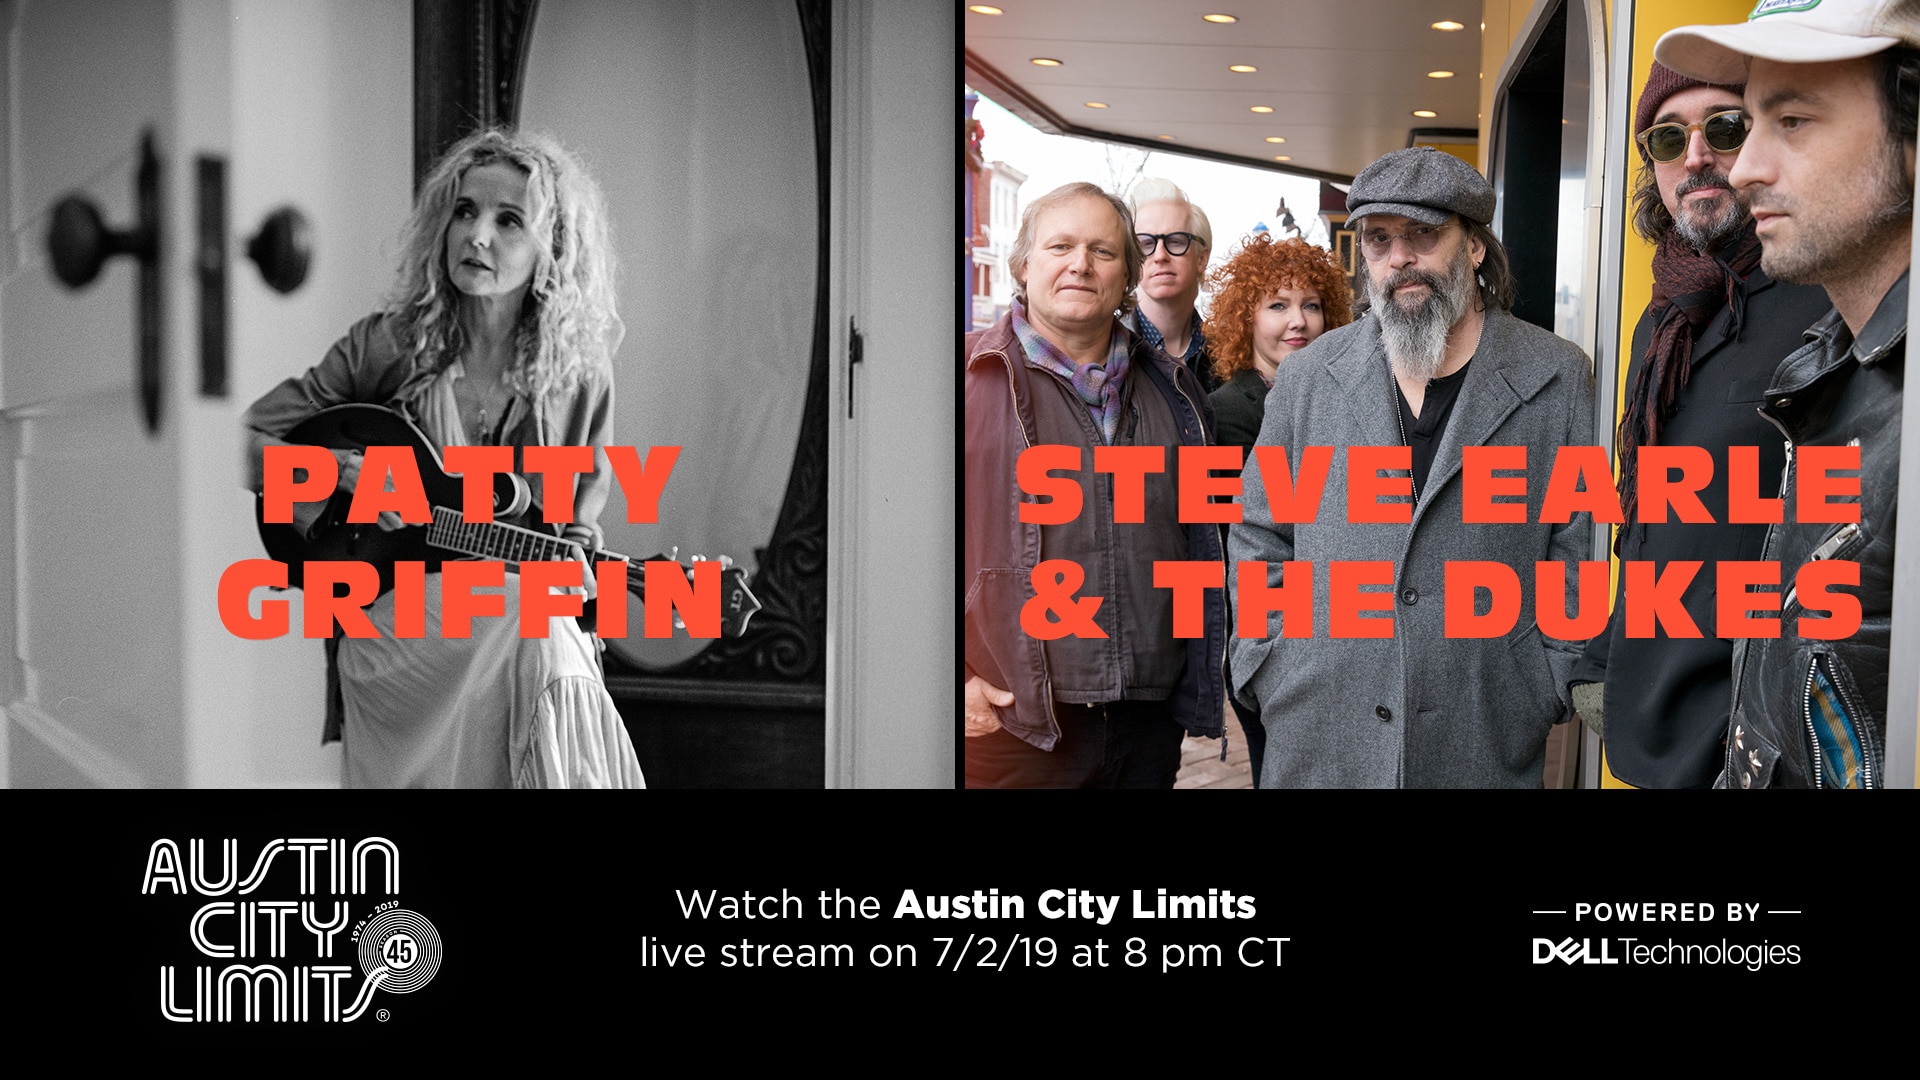 Watch Patty Griffin and Steve Earle Live on Austin City Limits Tonight